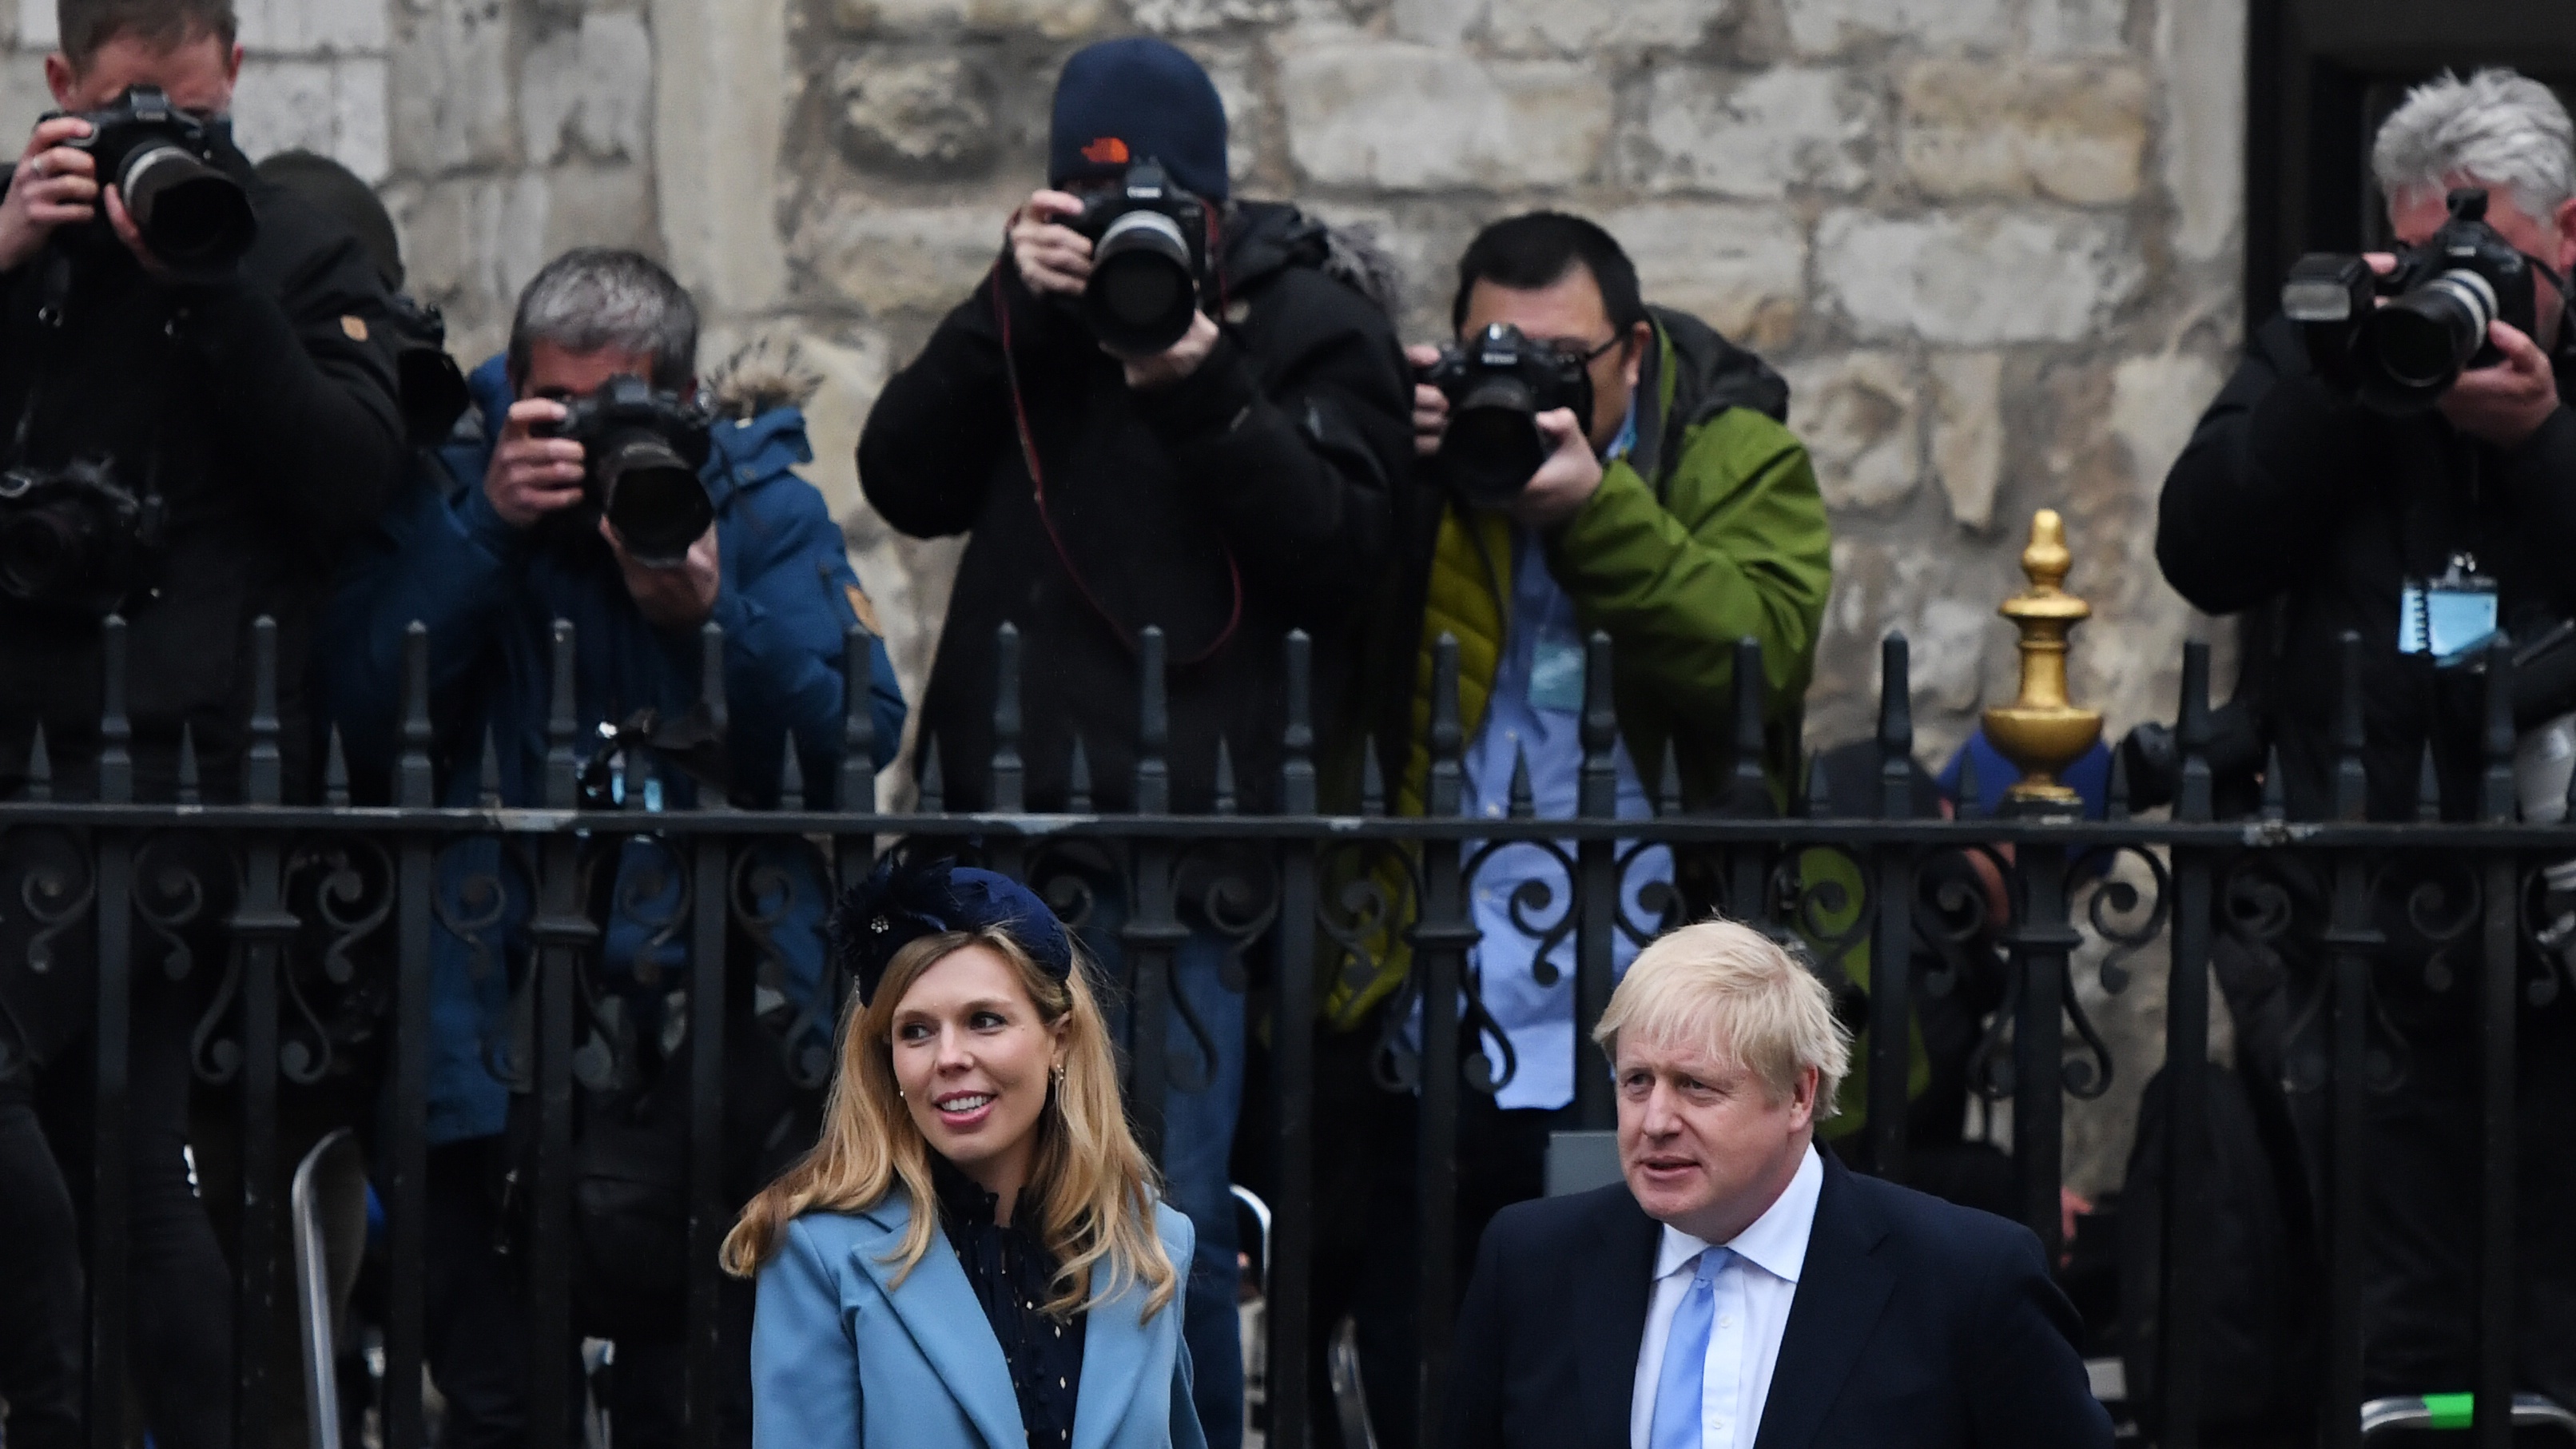 Boris Johnson and his fiancee Carrie Symonds leave the Commonwealth Day Service